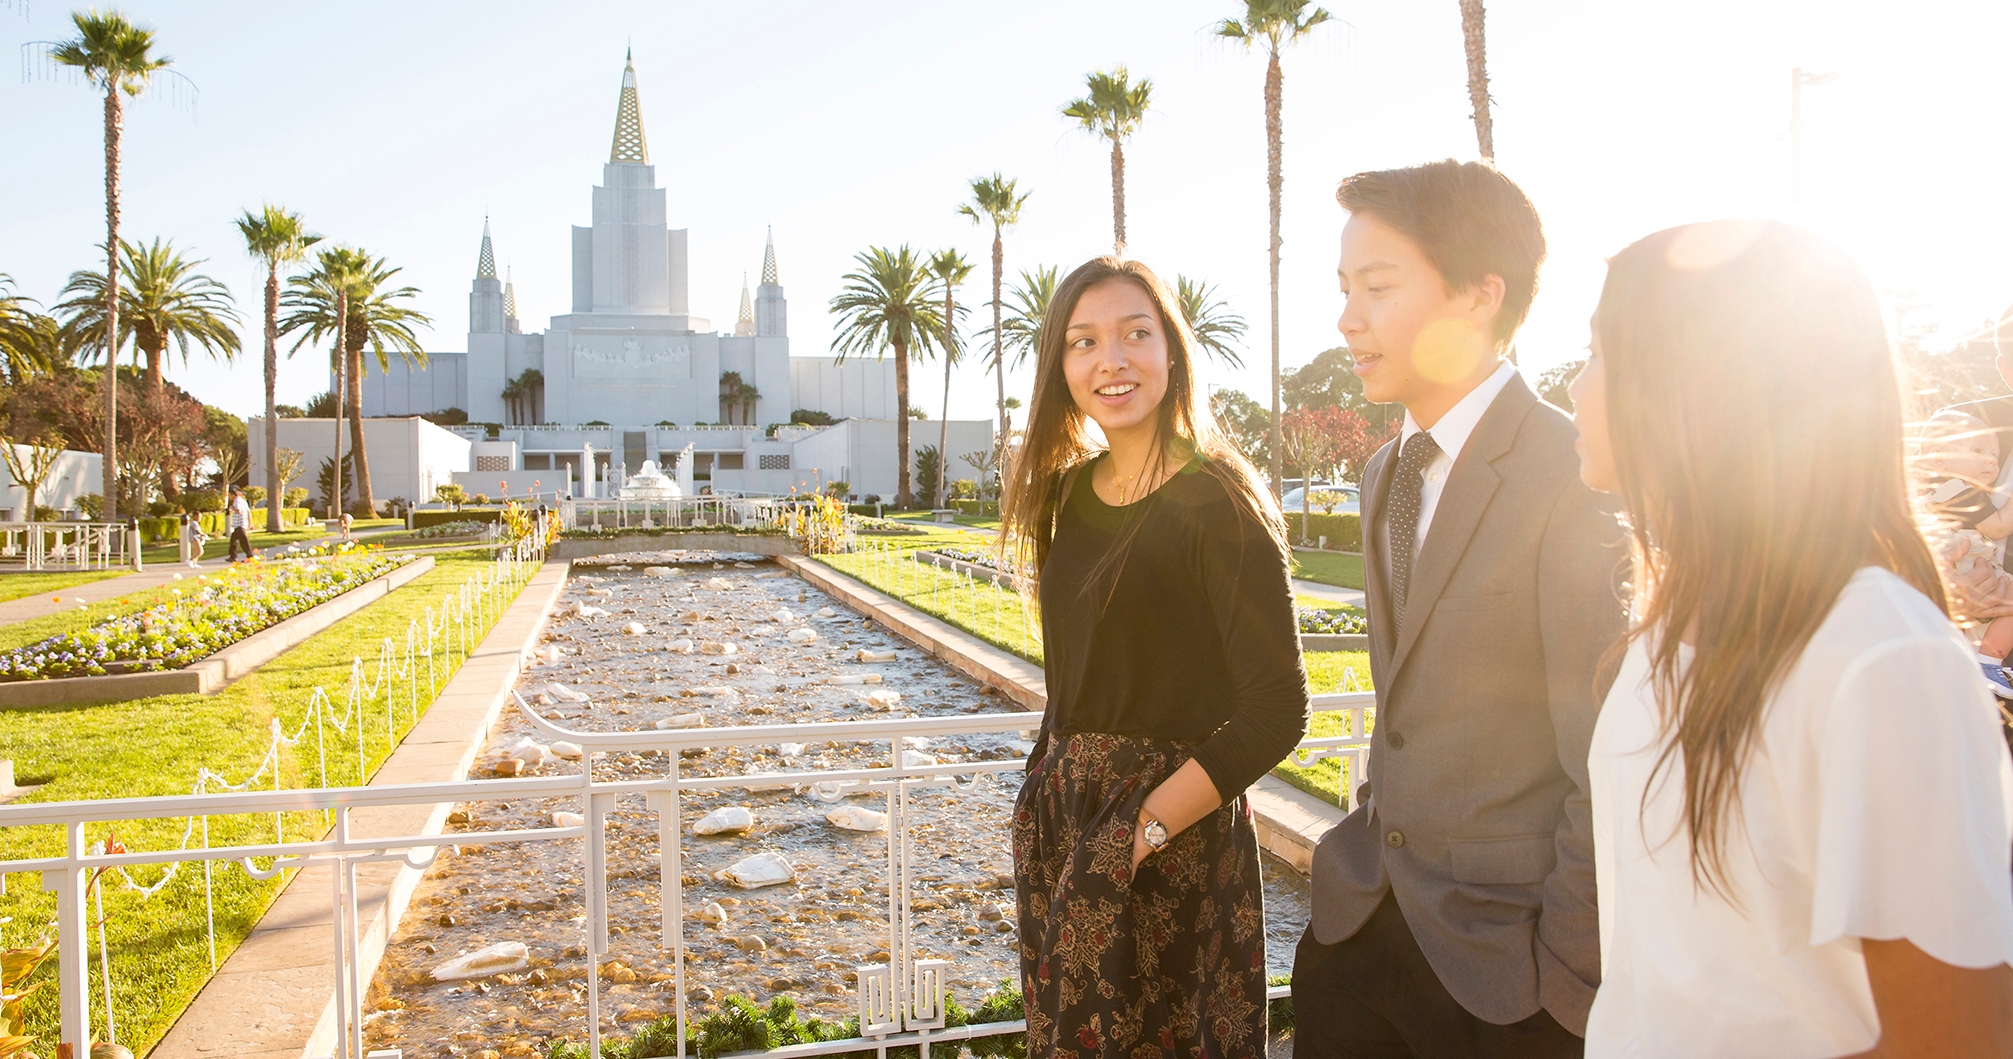 Siblings stroll grounds of Oakland temple.